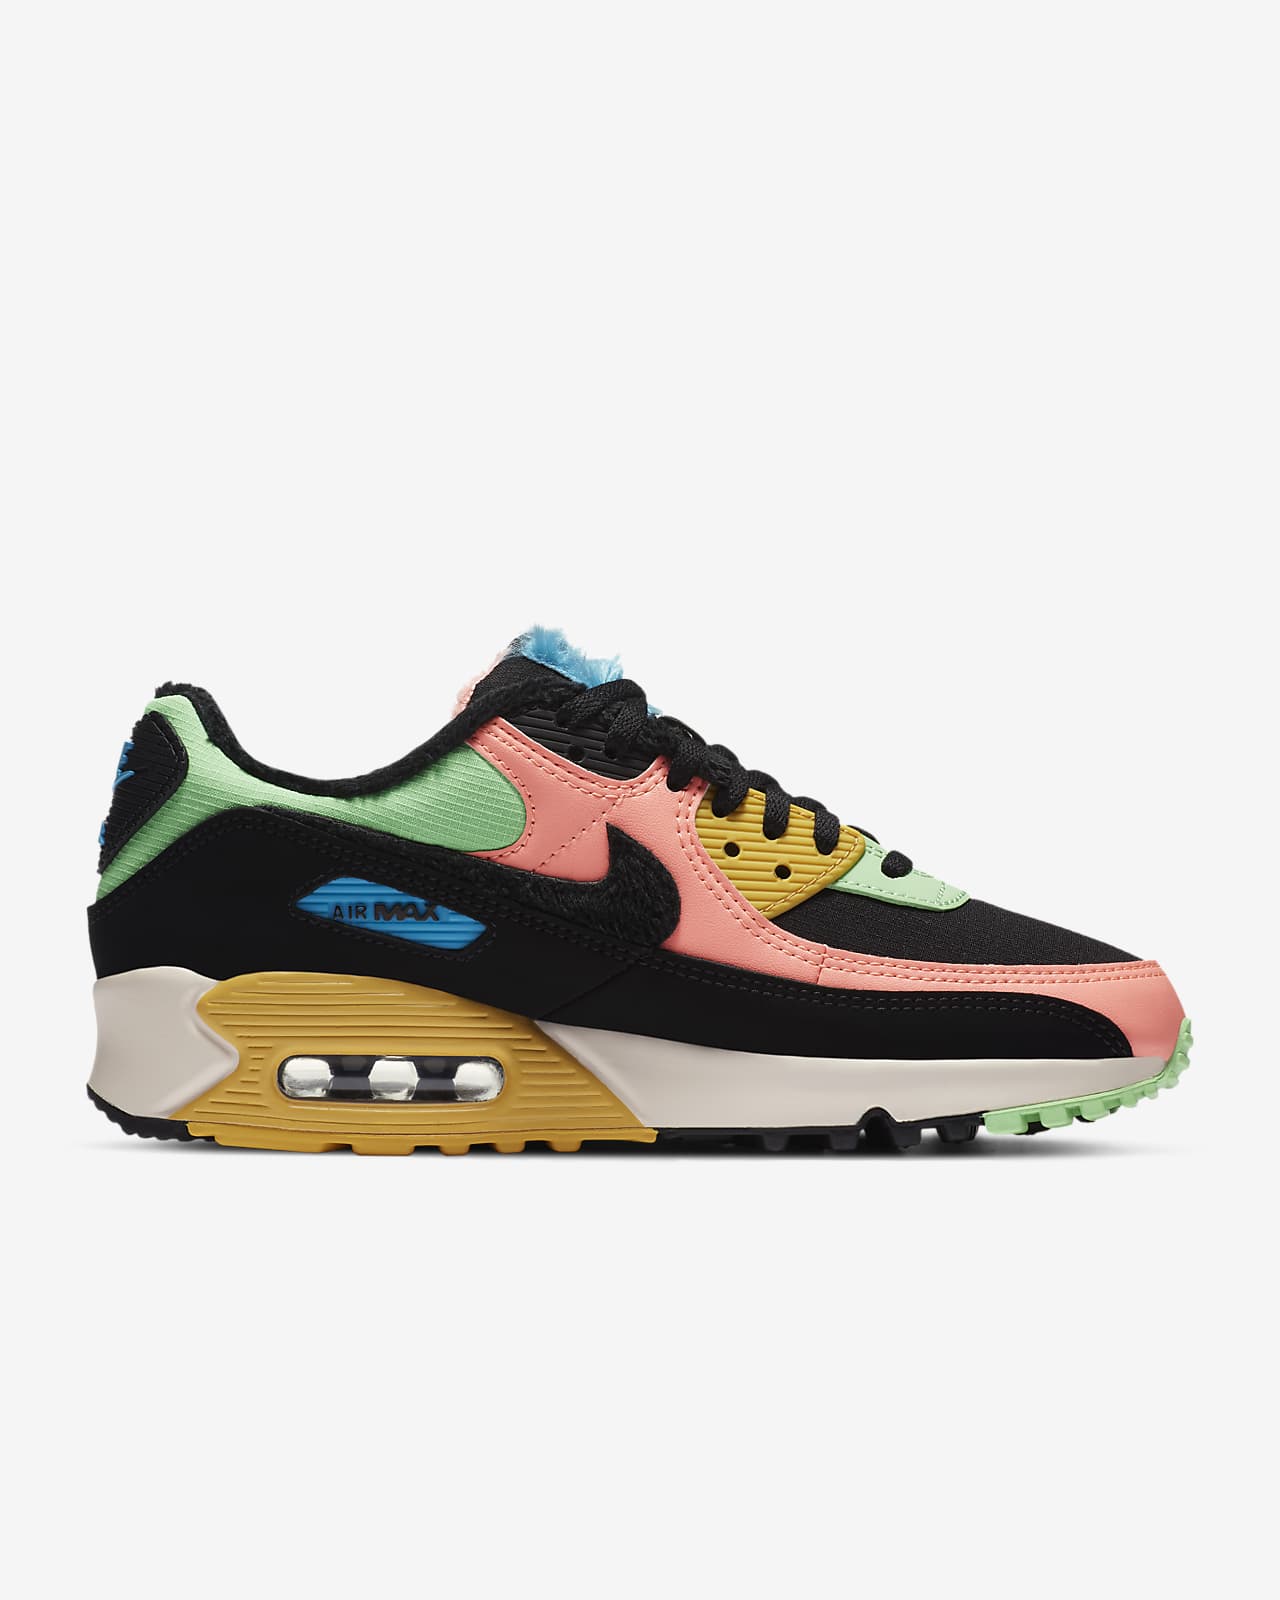 Parity > nike air max 90 fluo, Up to 70% OFF